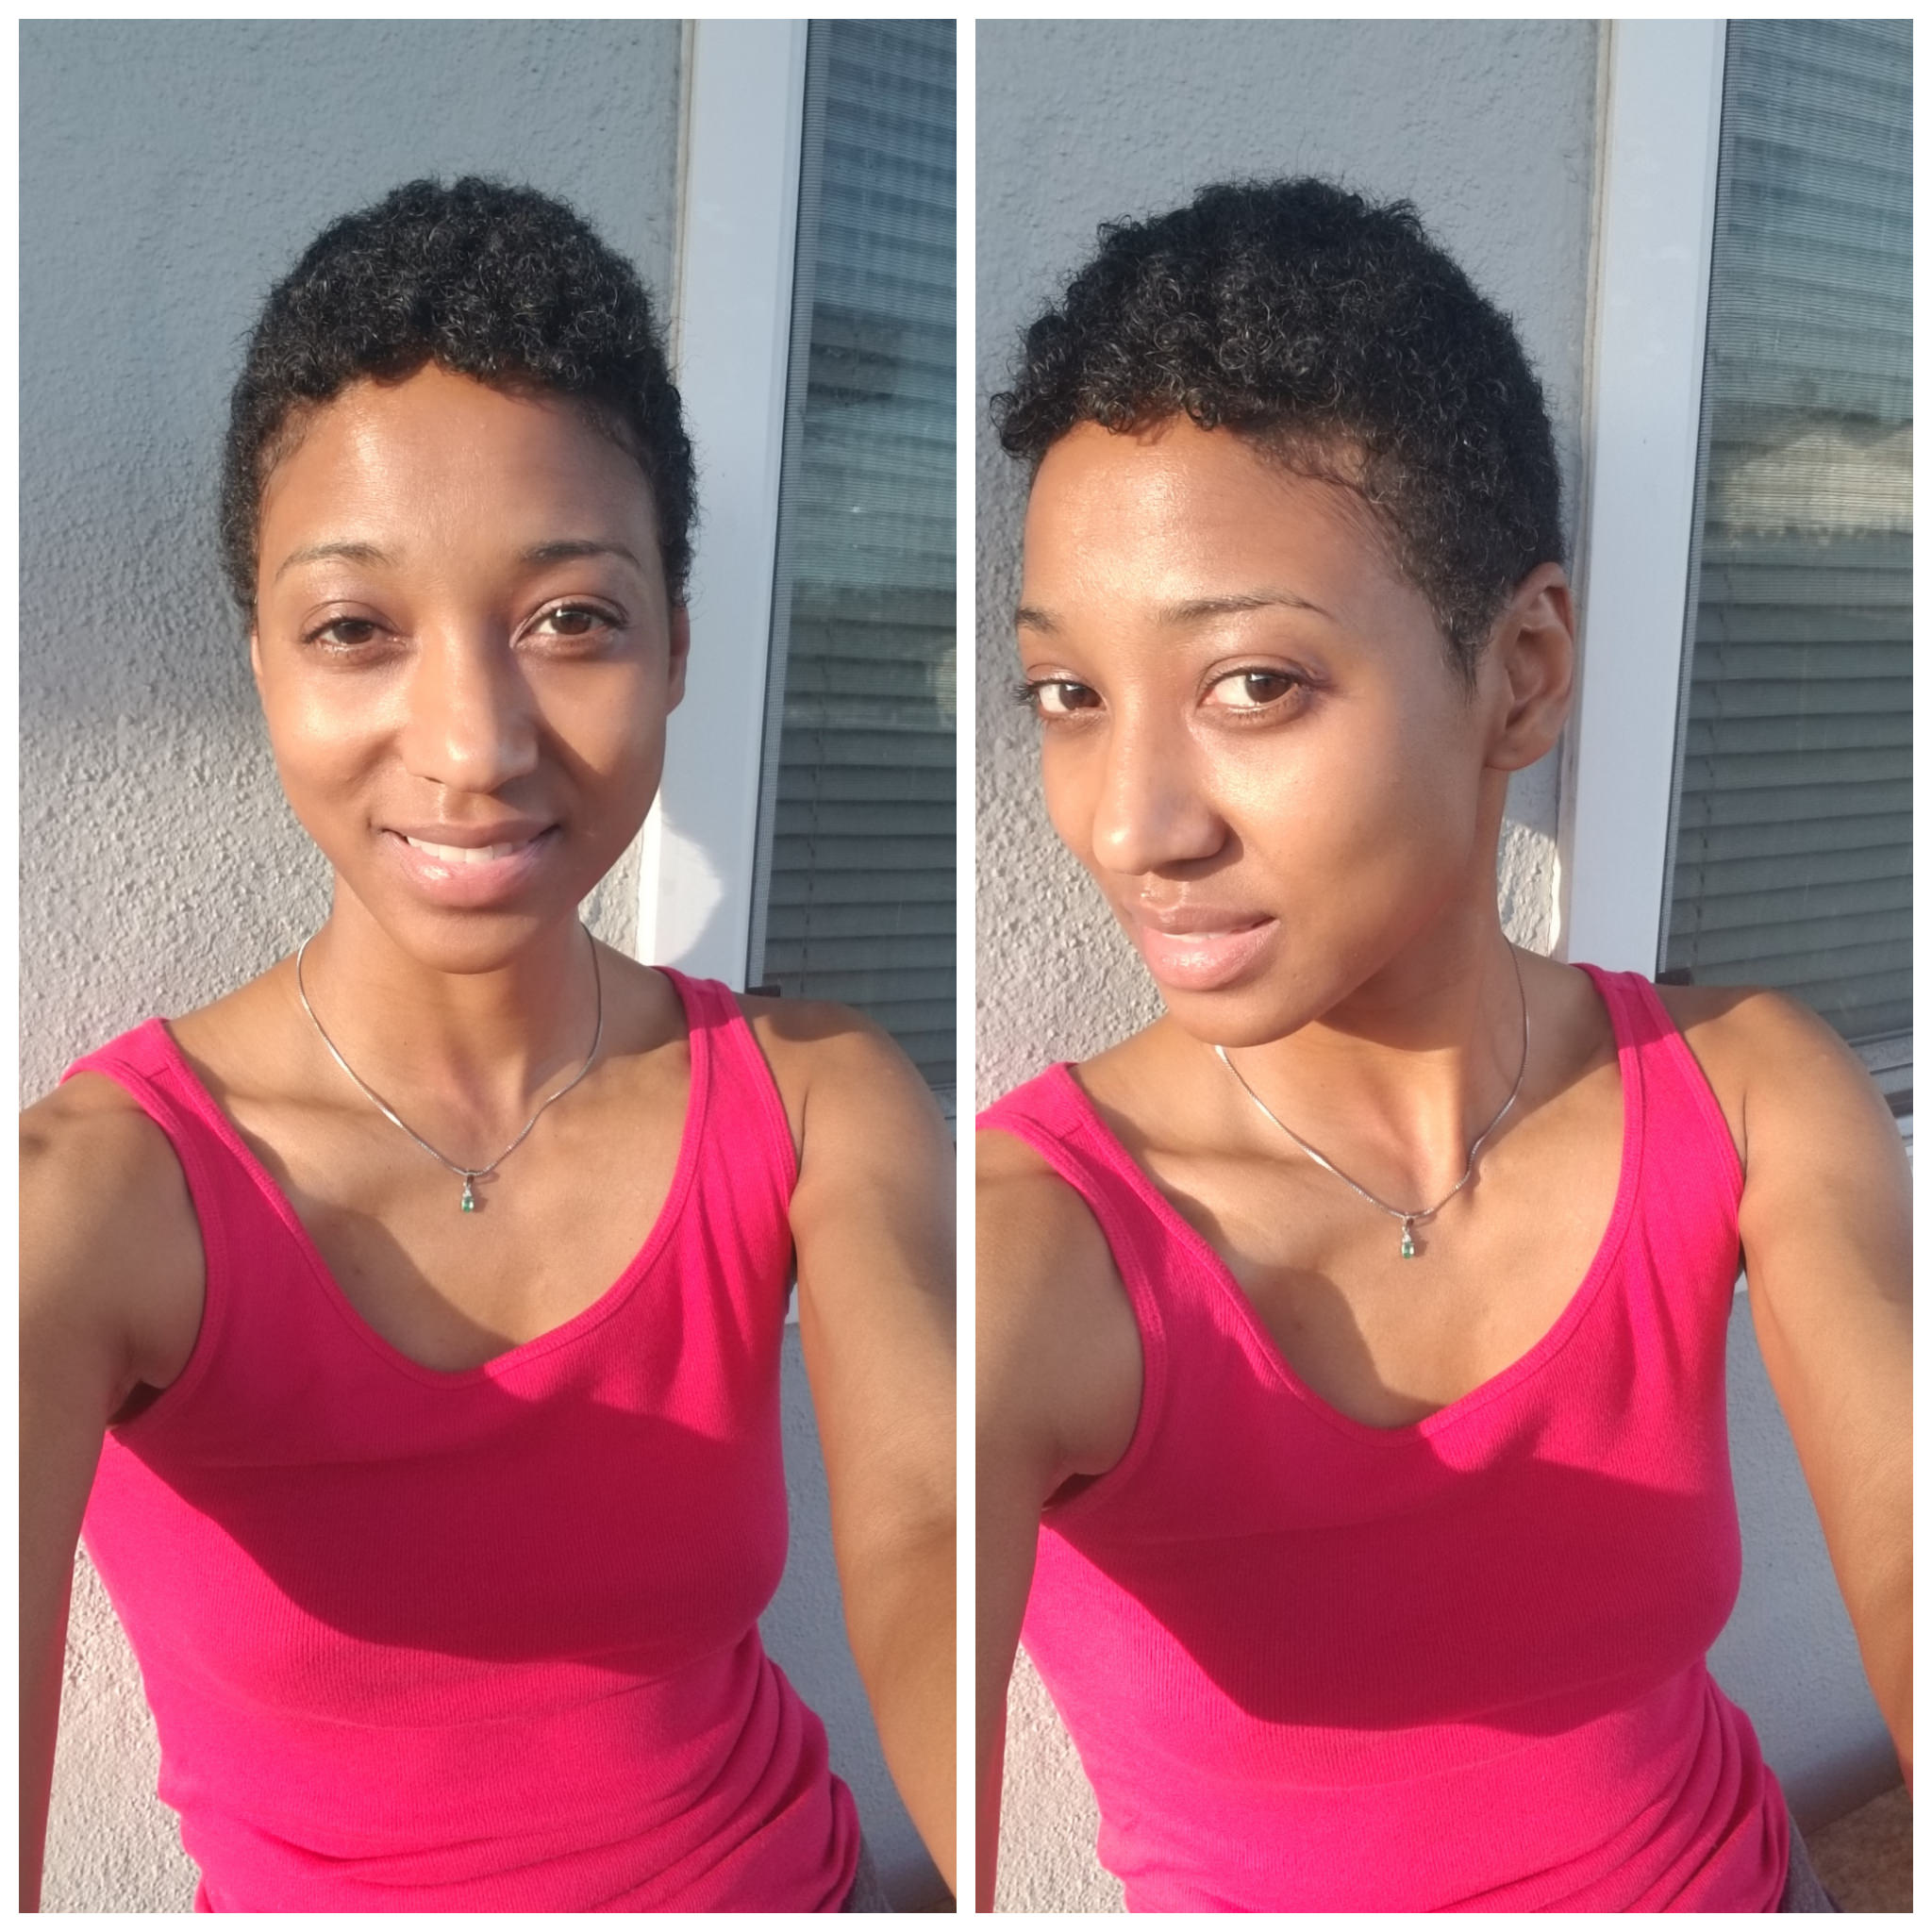 New Do! I cut off all my curls and I love them but they were taking up a lot of my time & plus I've had the same hairstyle my whole life! This crop cut is so much faster, easier,  & it's about time for me to rock a new look.